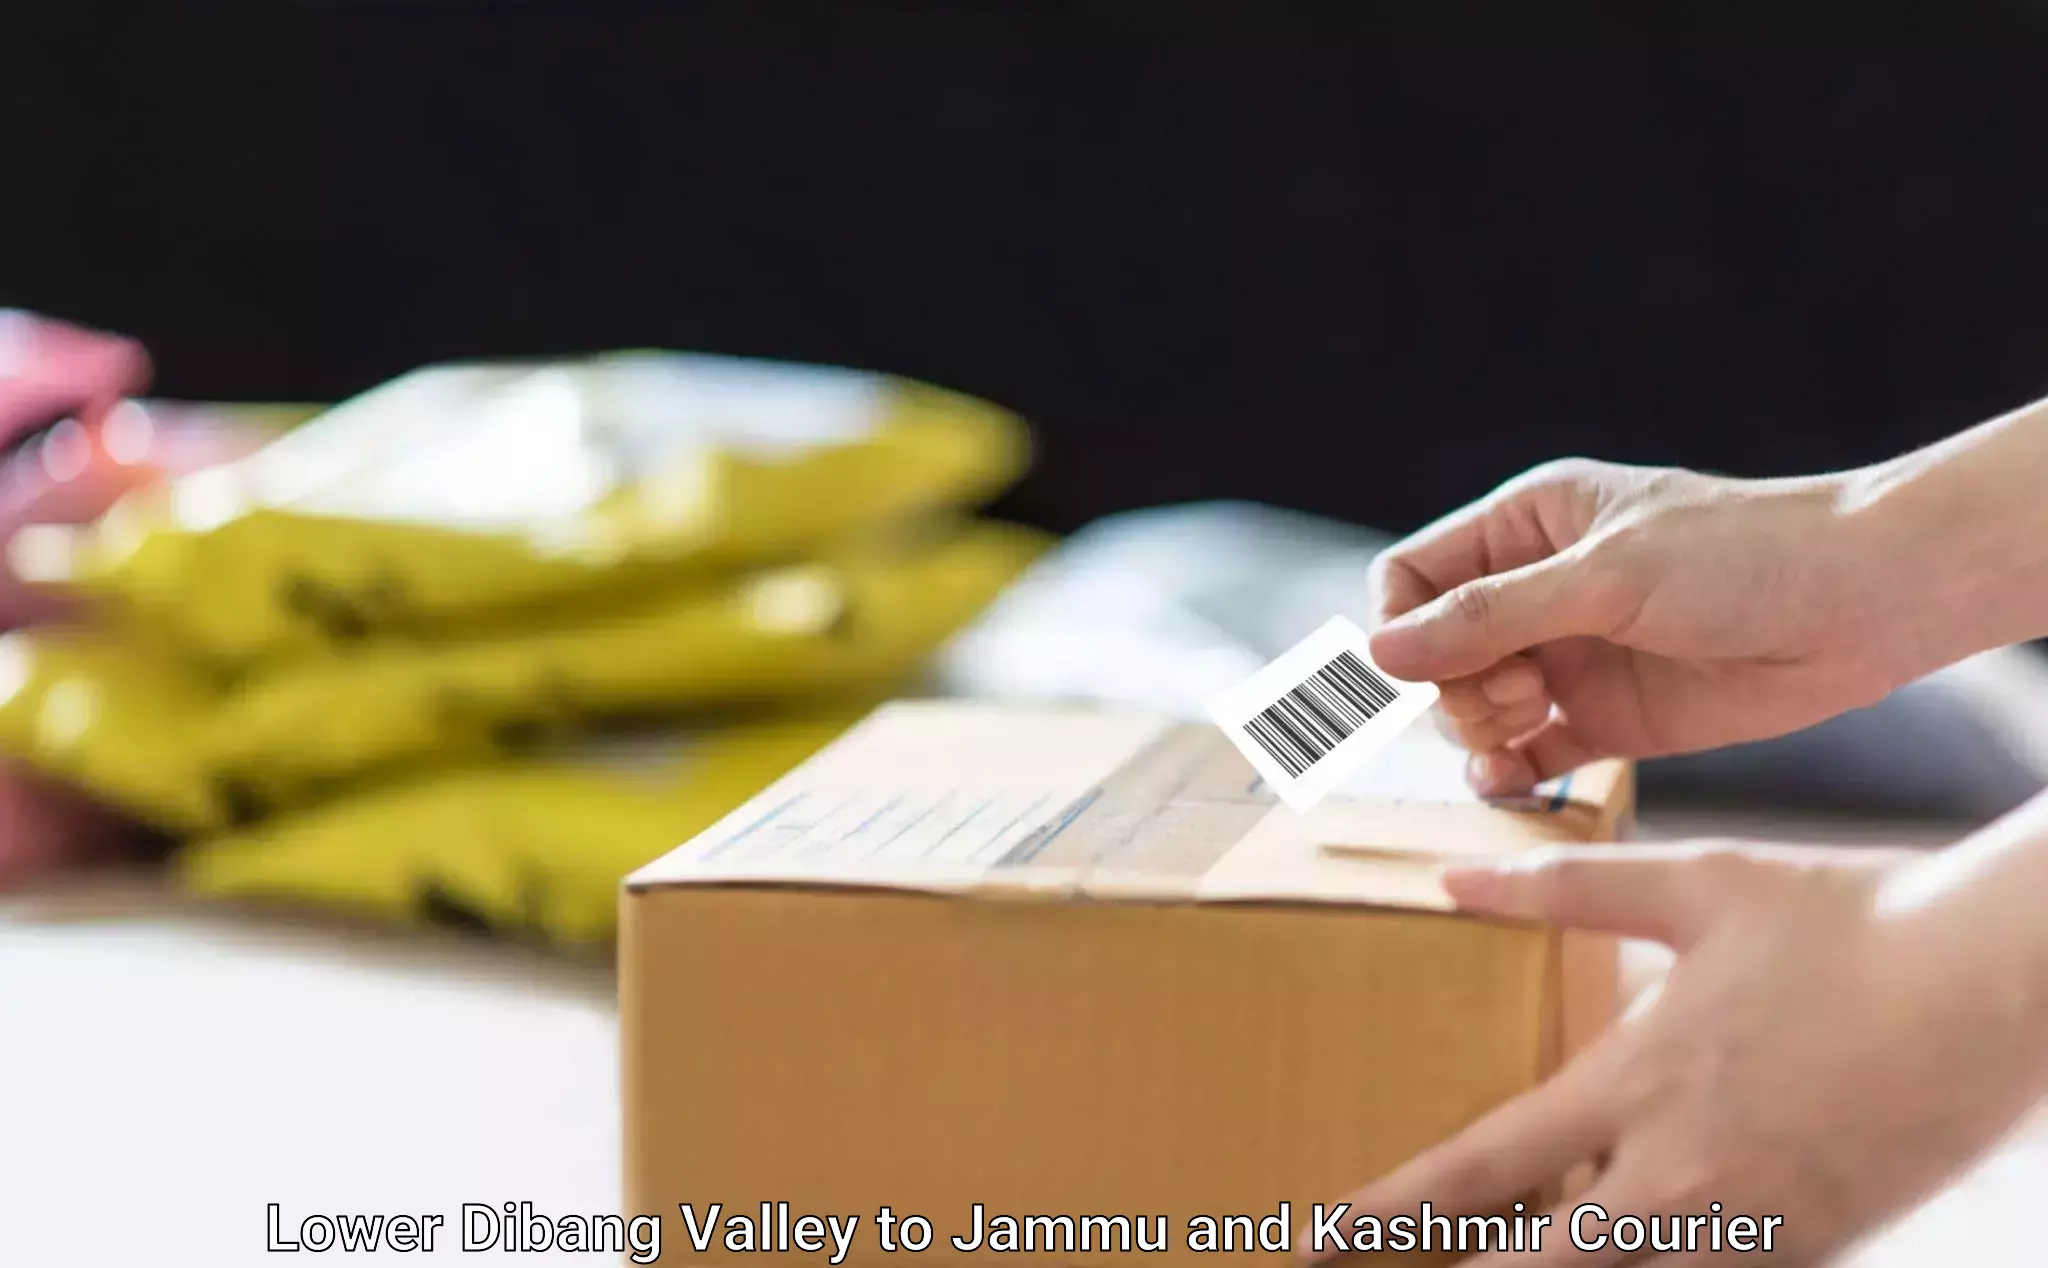 Personal parcel delivery in Lower Dibang Valley to Kupwara